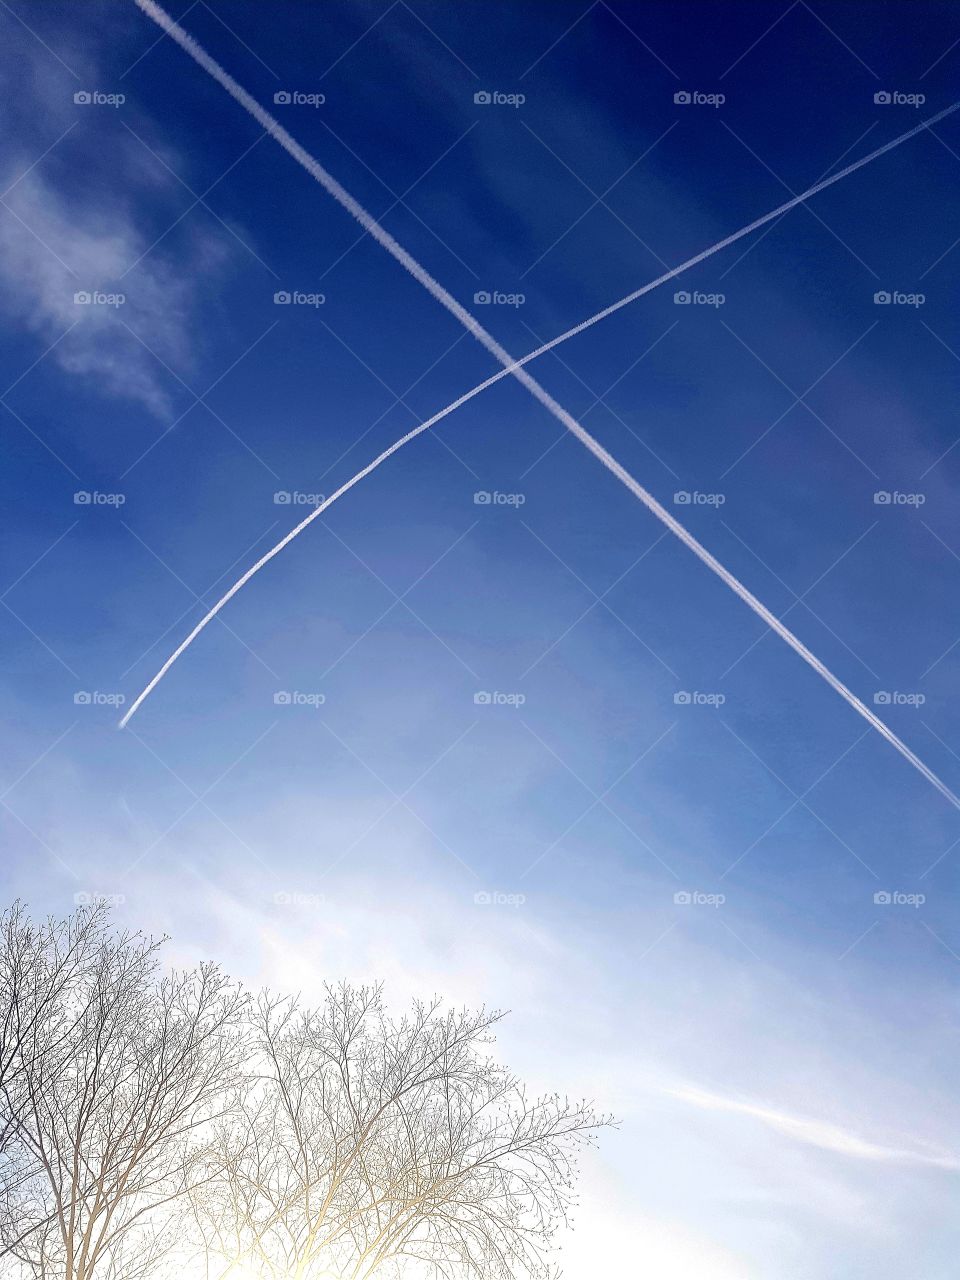 x marks the spot